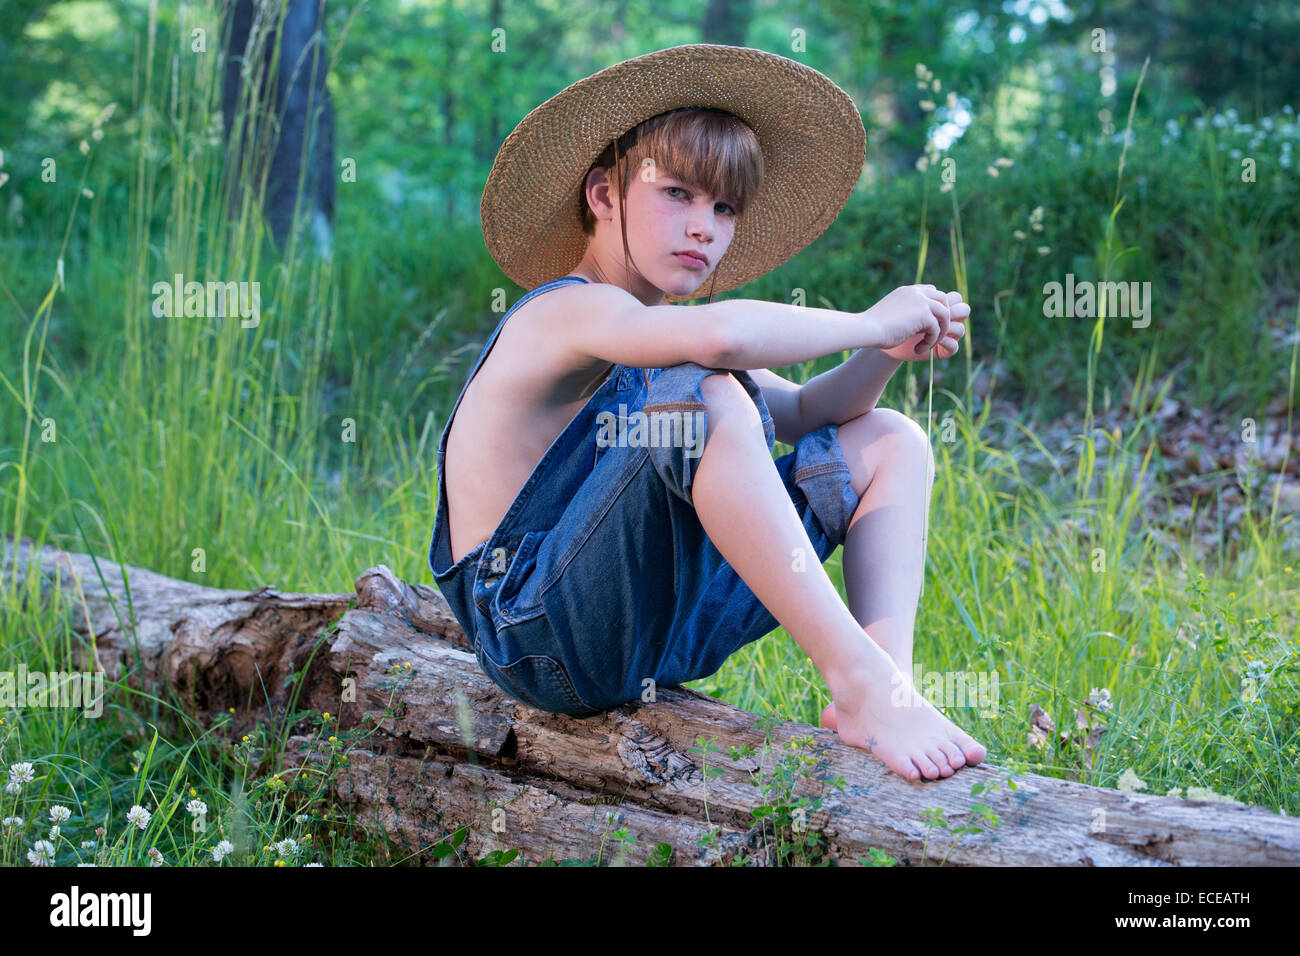 Young boy sitting on log wearing straw hat and blue overalls Stock Photo